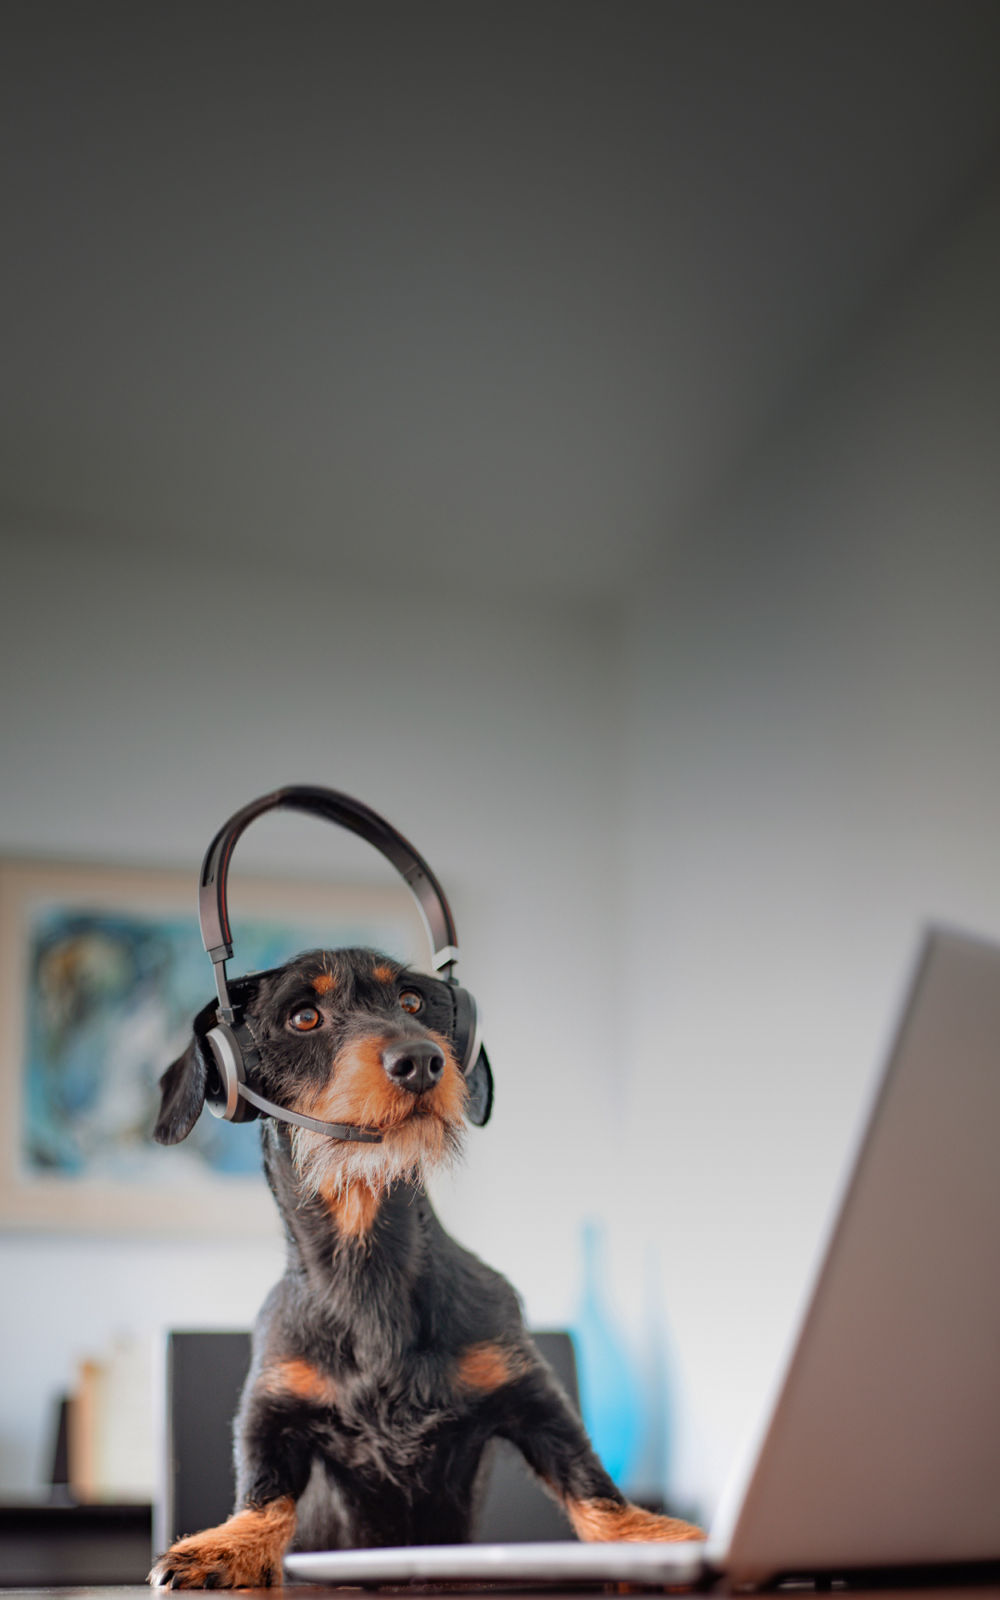 Dog and headphones on video-call